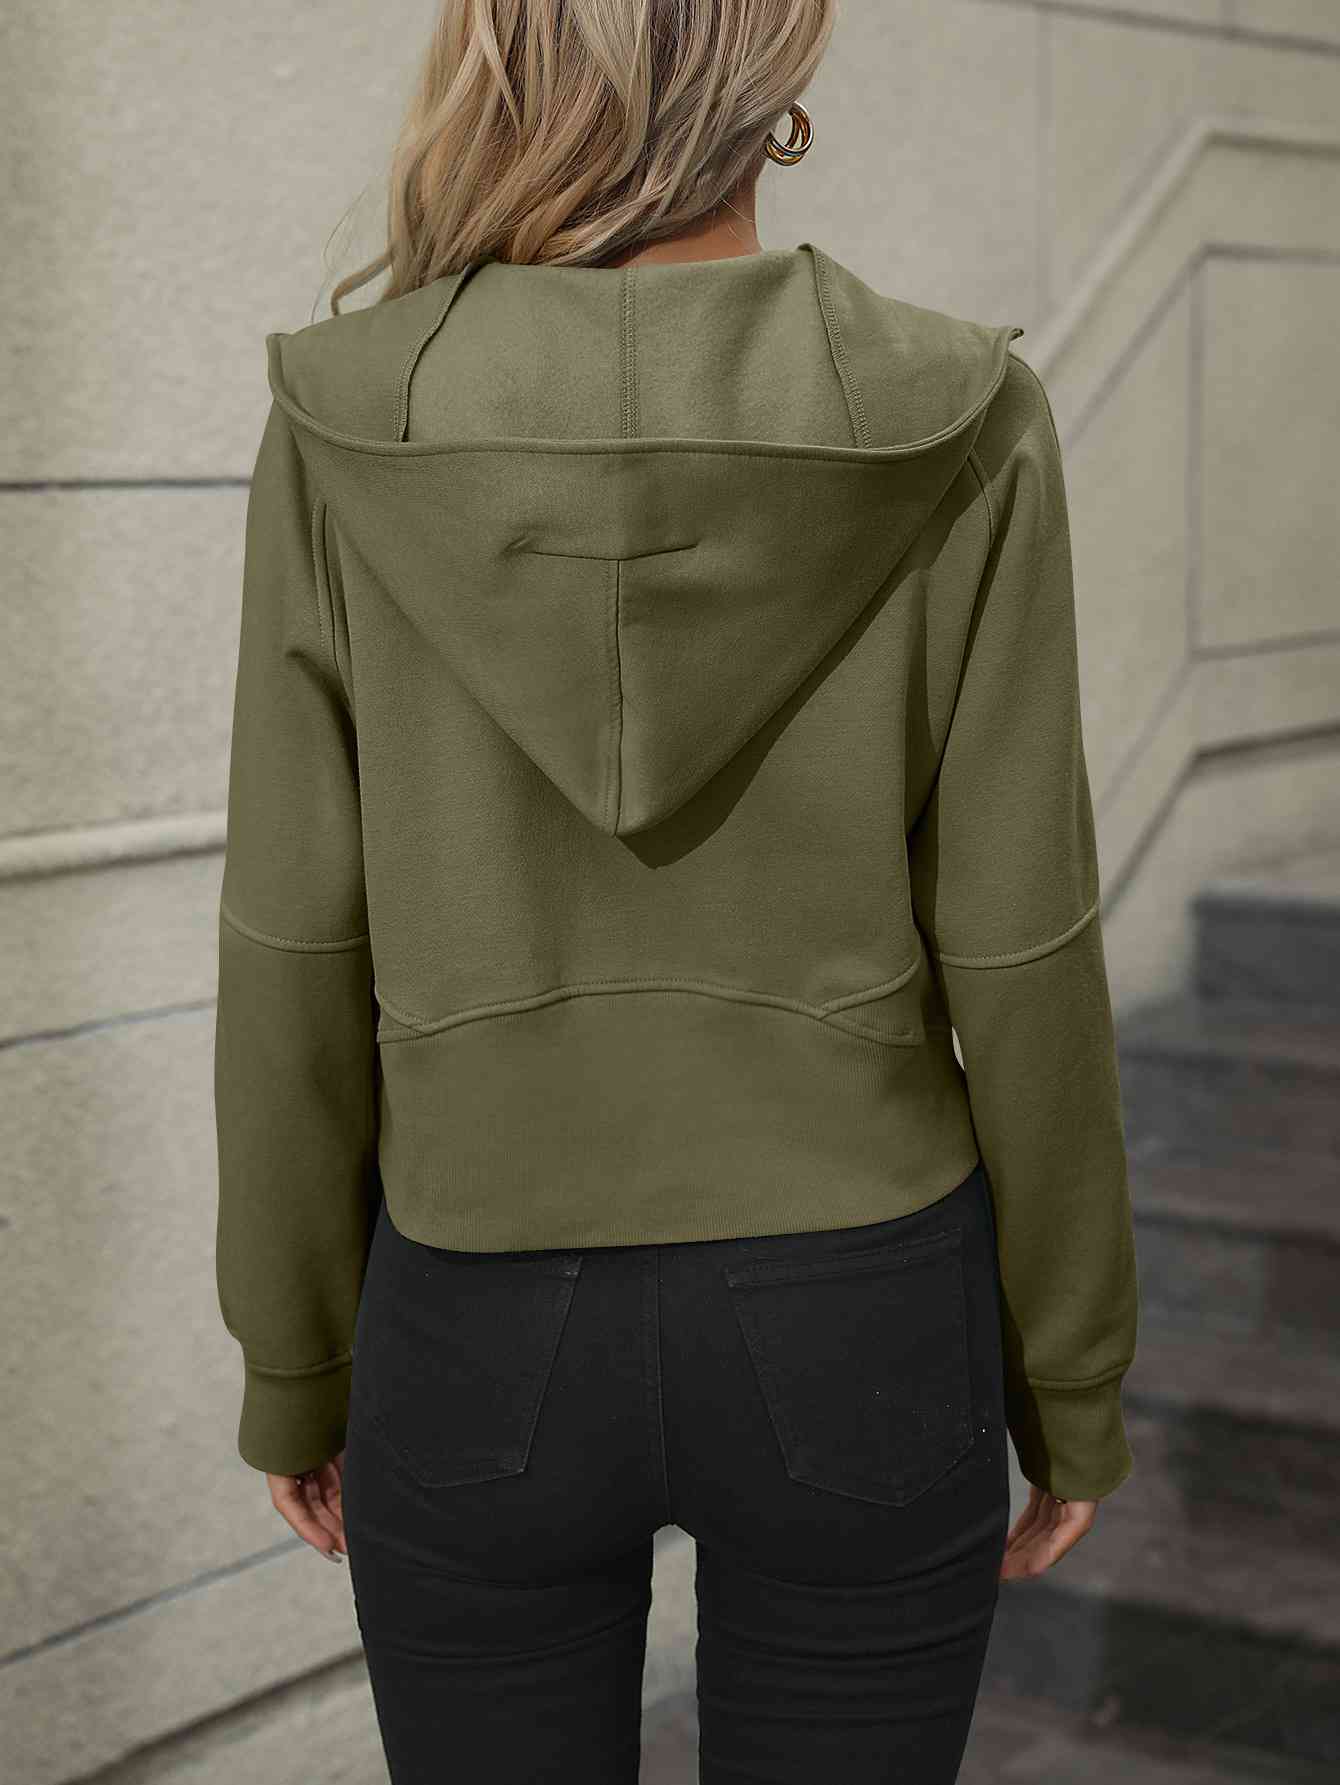 Dim Gray Zip-Up Raglan Sleeve Hoodie with Pocket Sentient Beauty Fashions Apparel &amp; Accessories